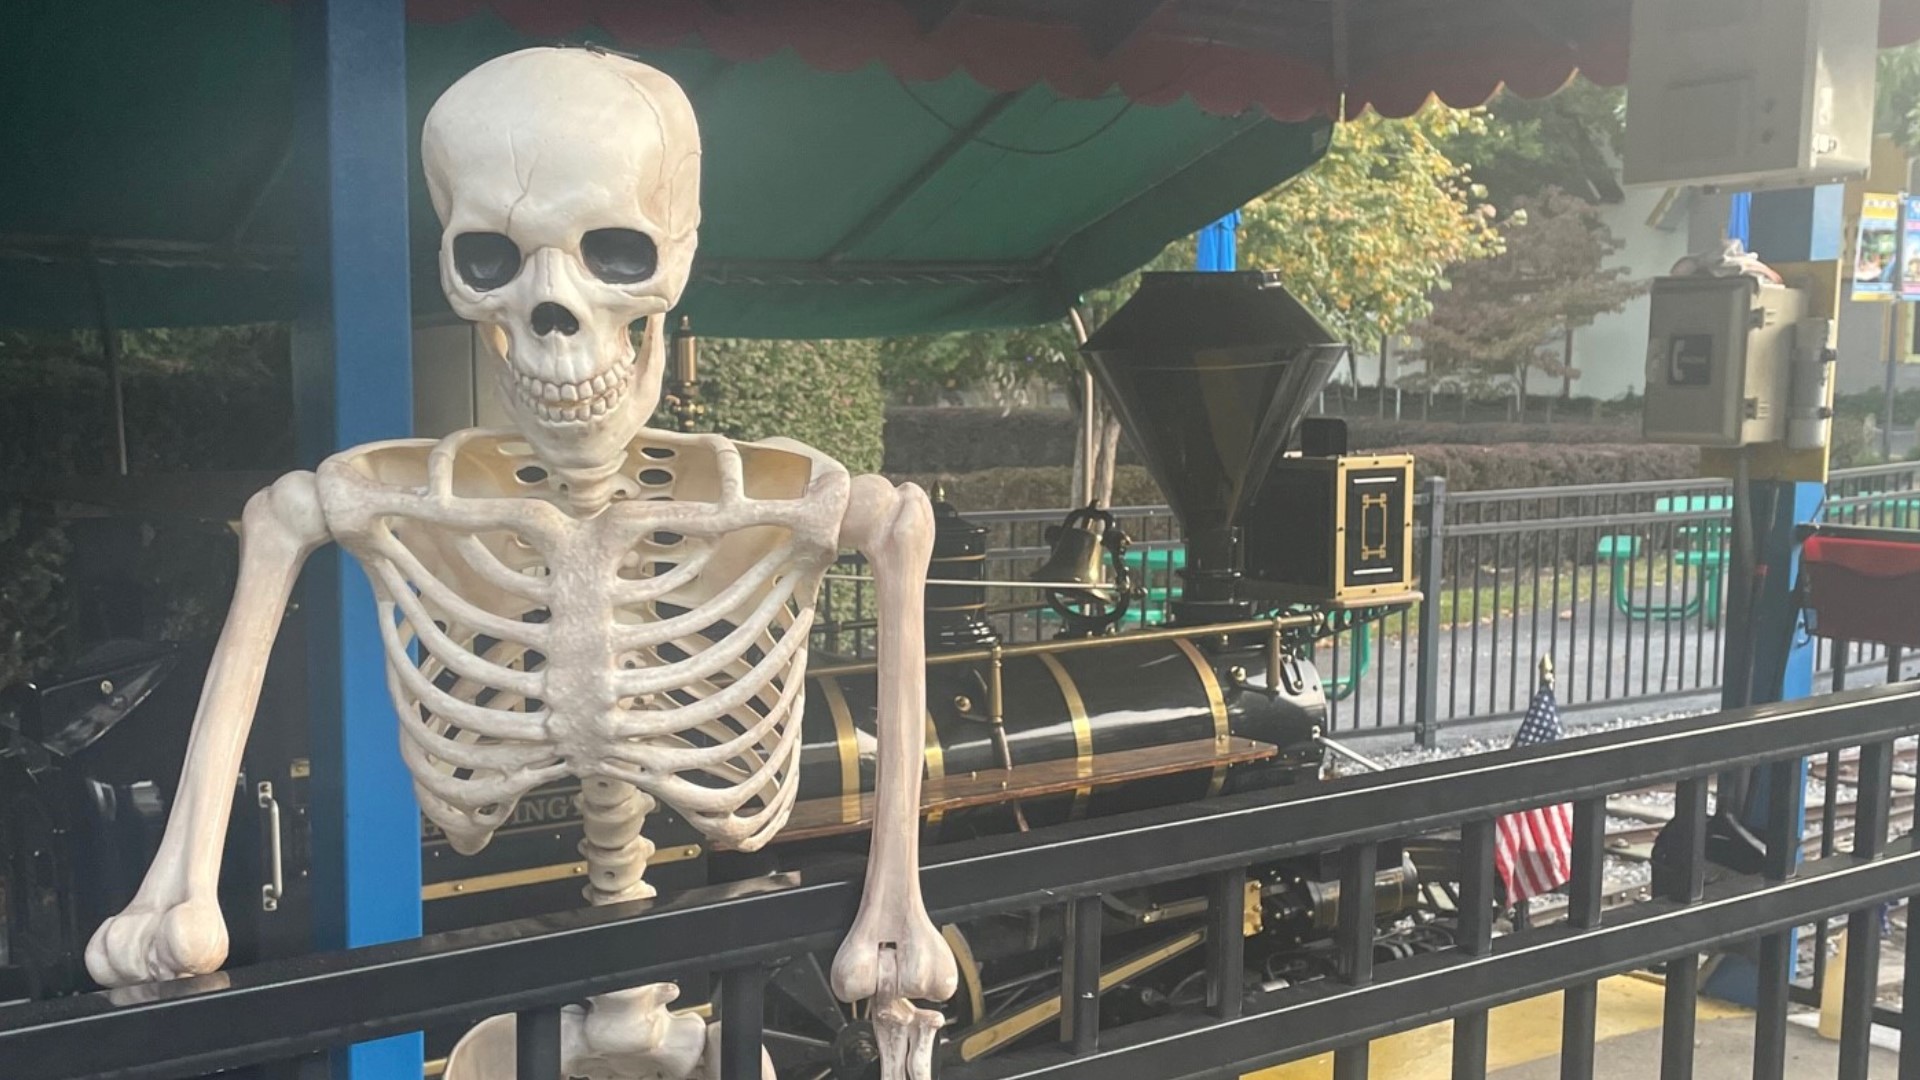 On weekends from October 1 to October 30, Dutch Wonderland transforms for the Halloween season.